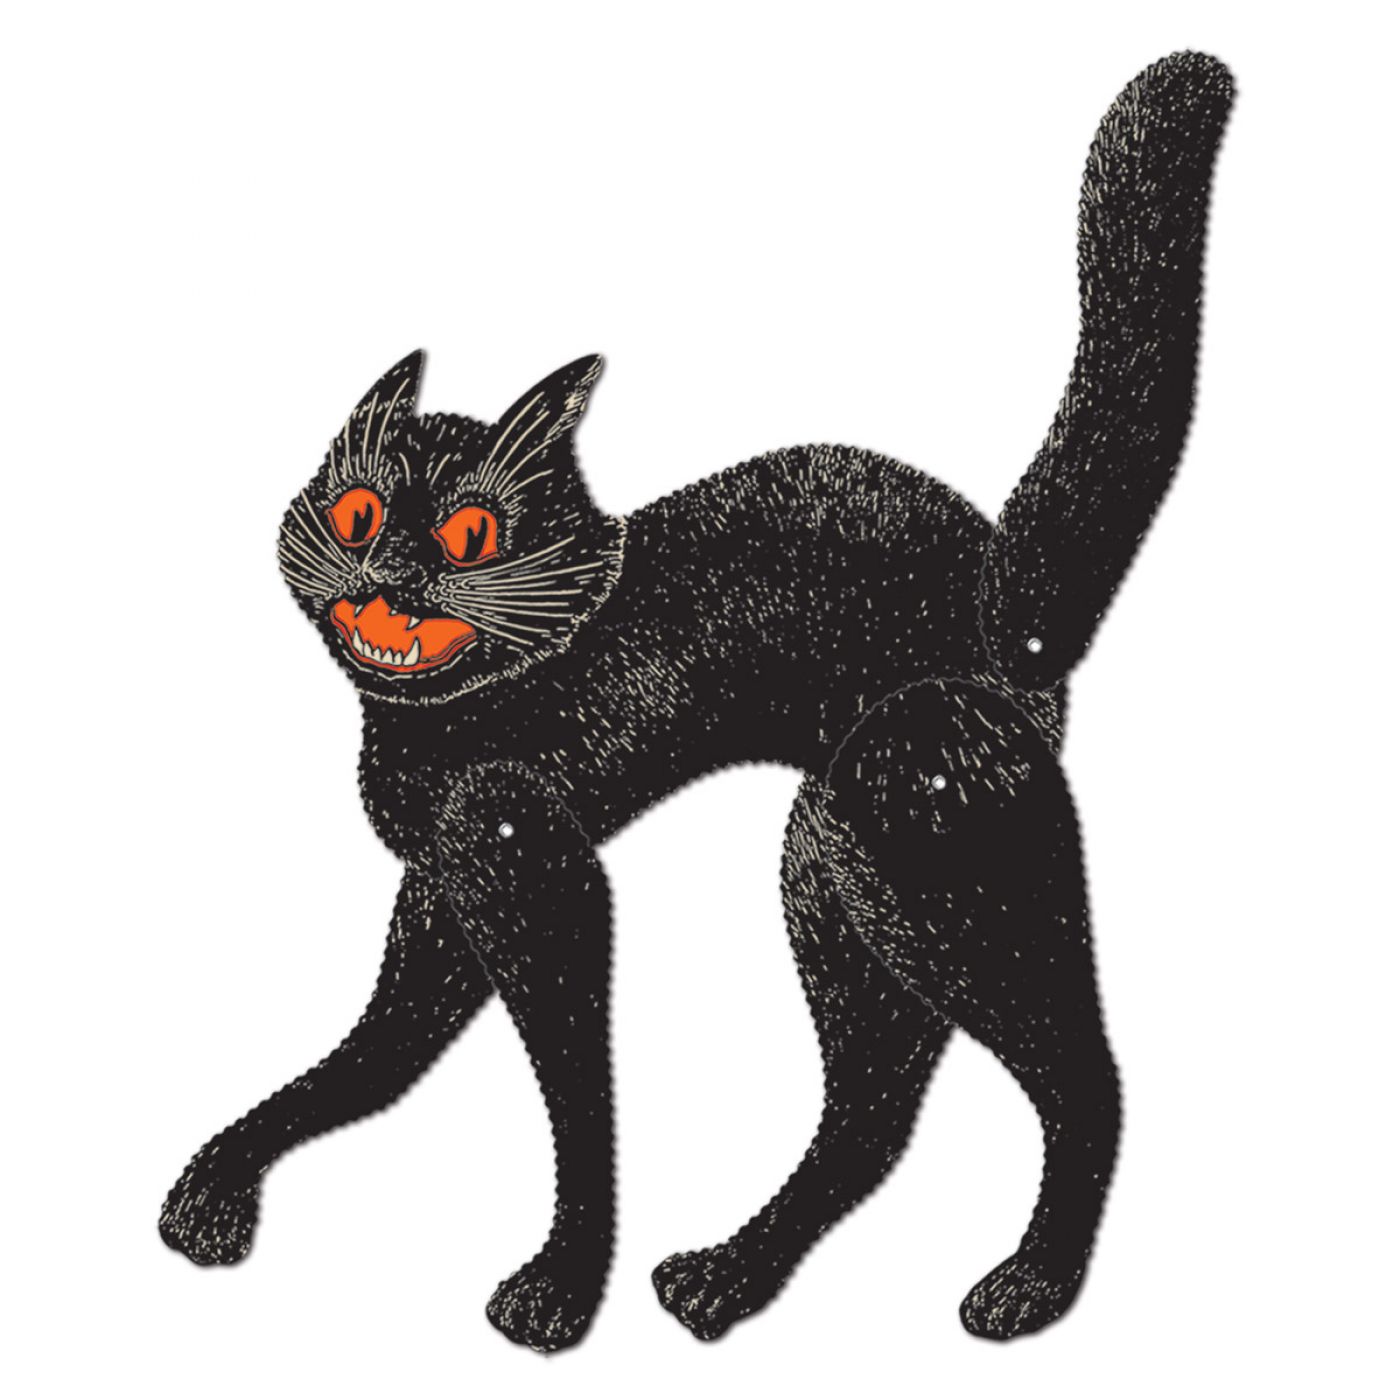 Vintage Halloween Jointed Scratch Cat image